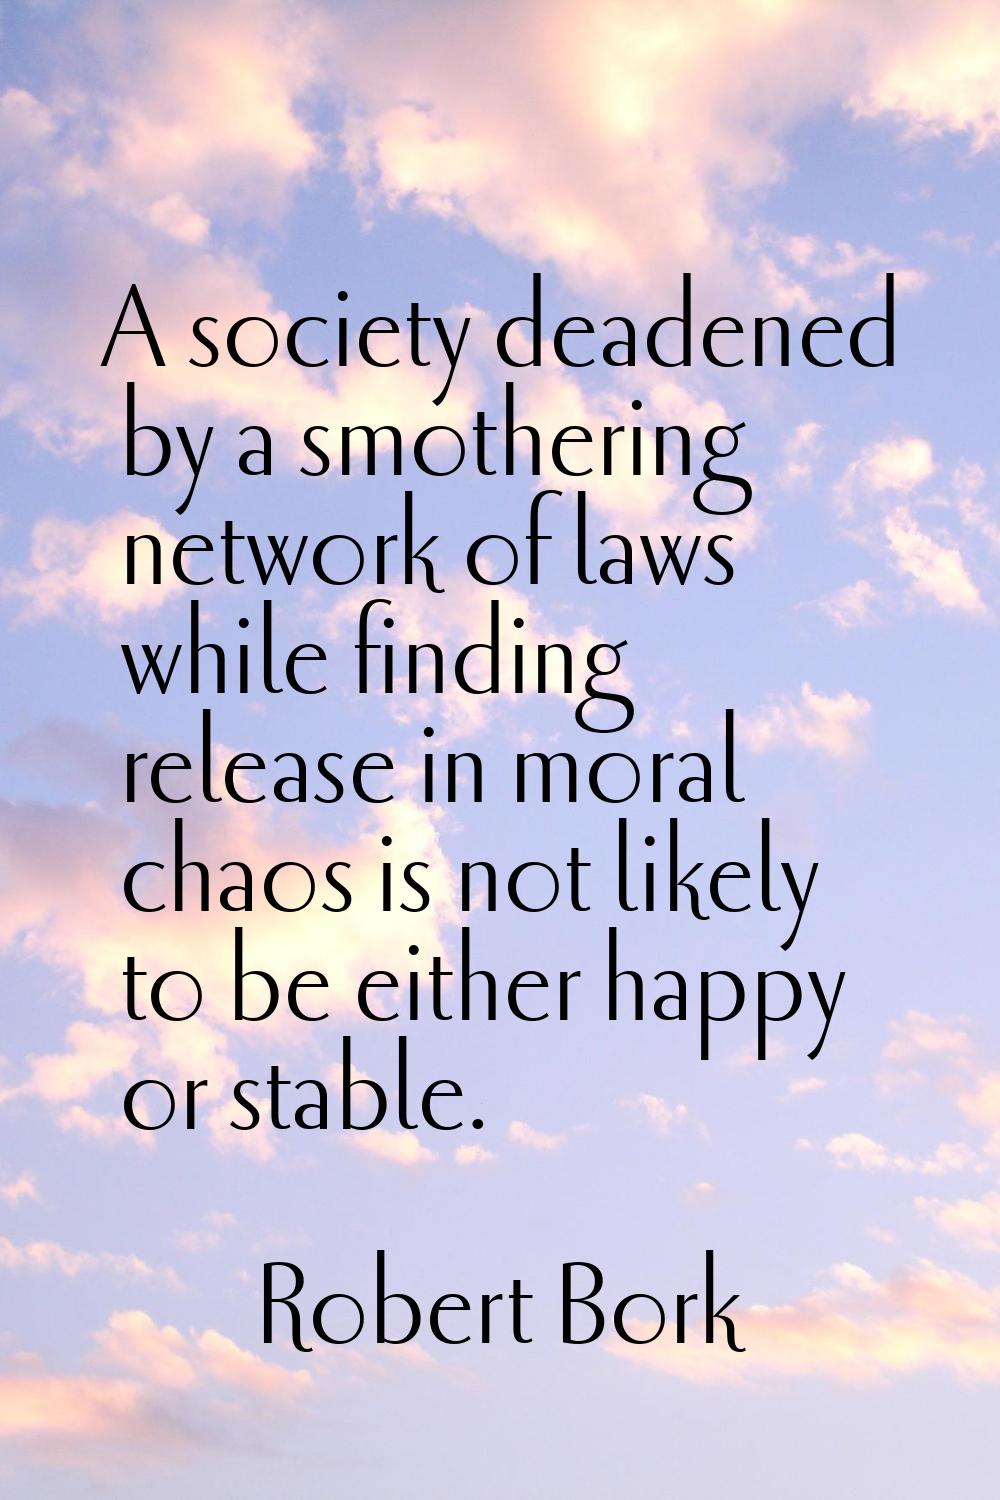 A society deadened by a smothering network of laws while finding release in moral chaos is not like